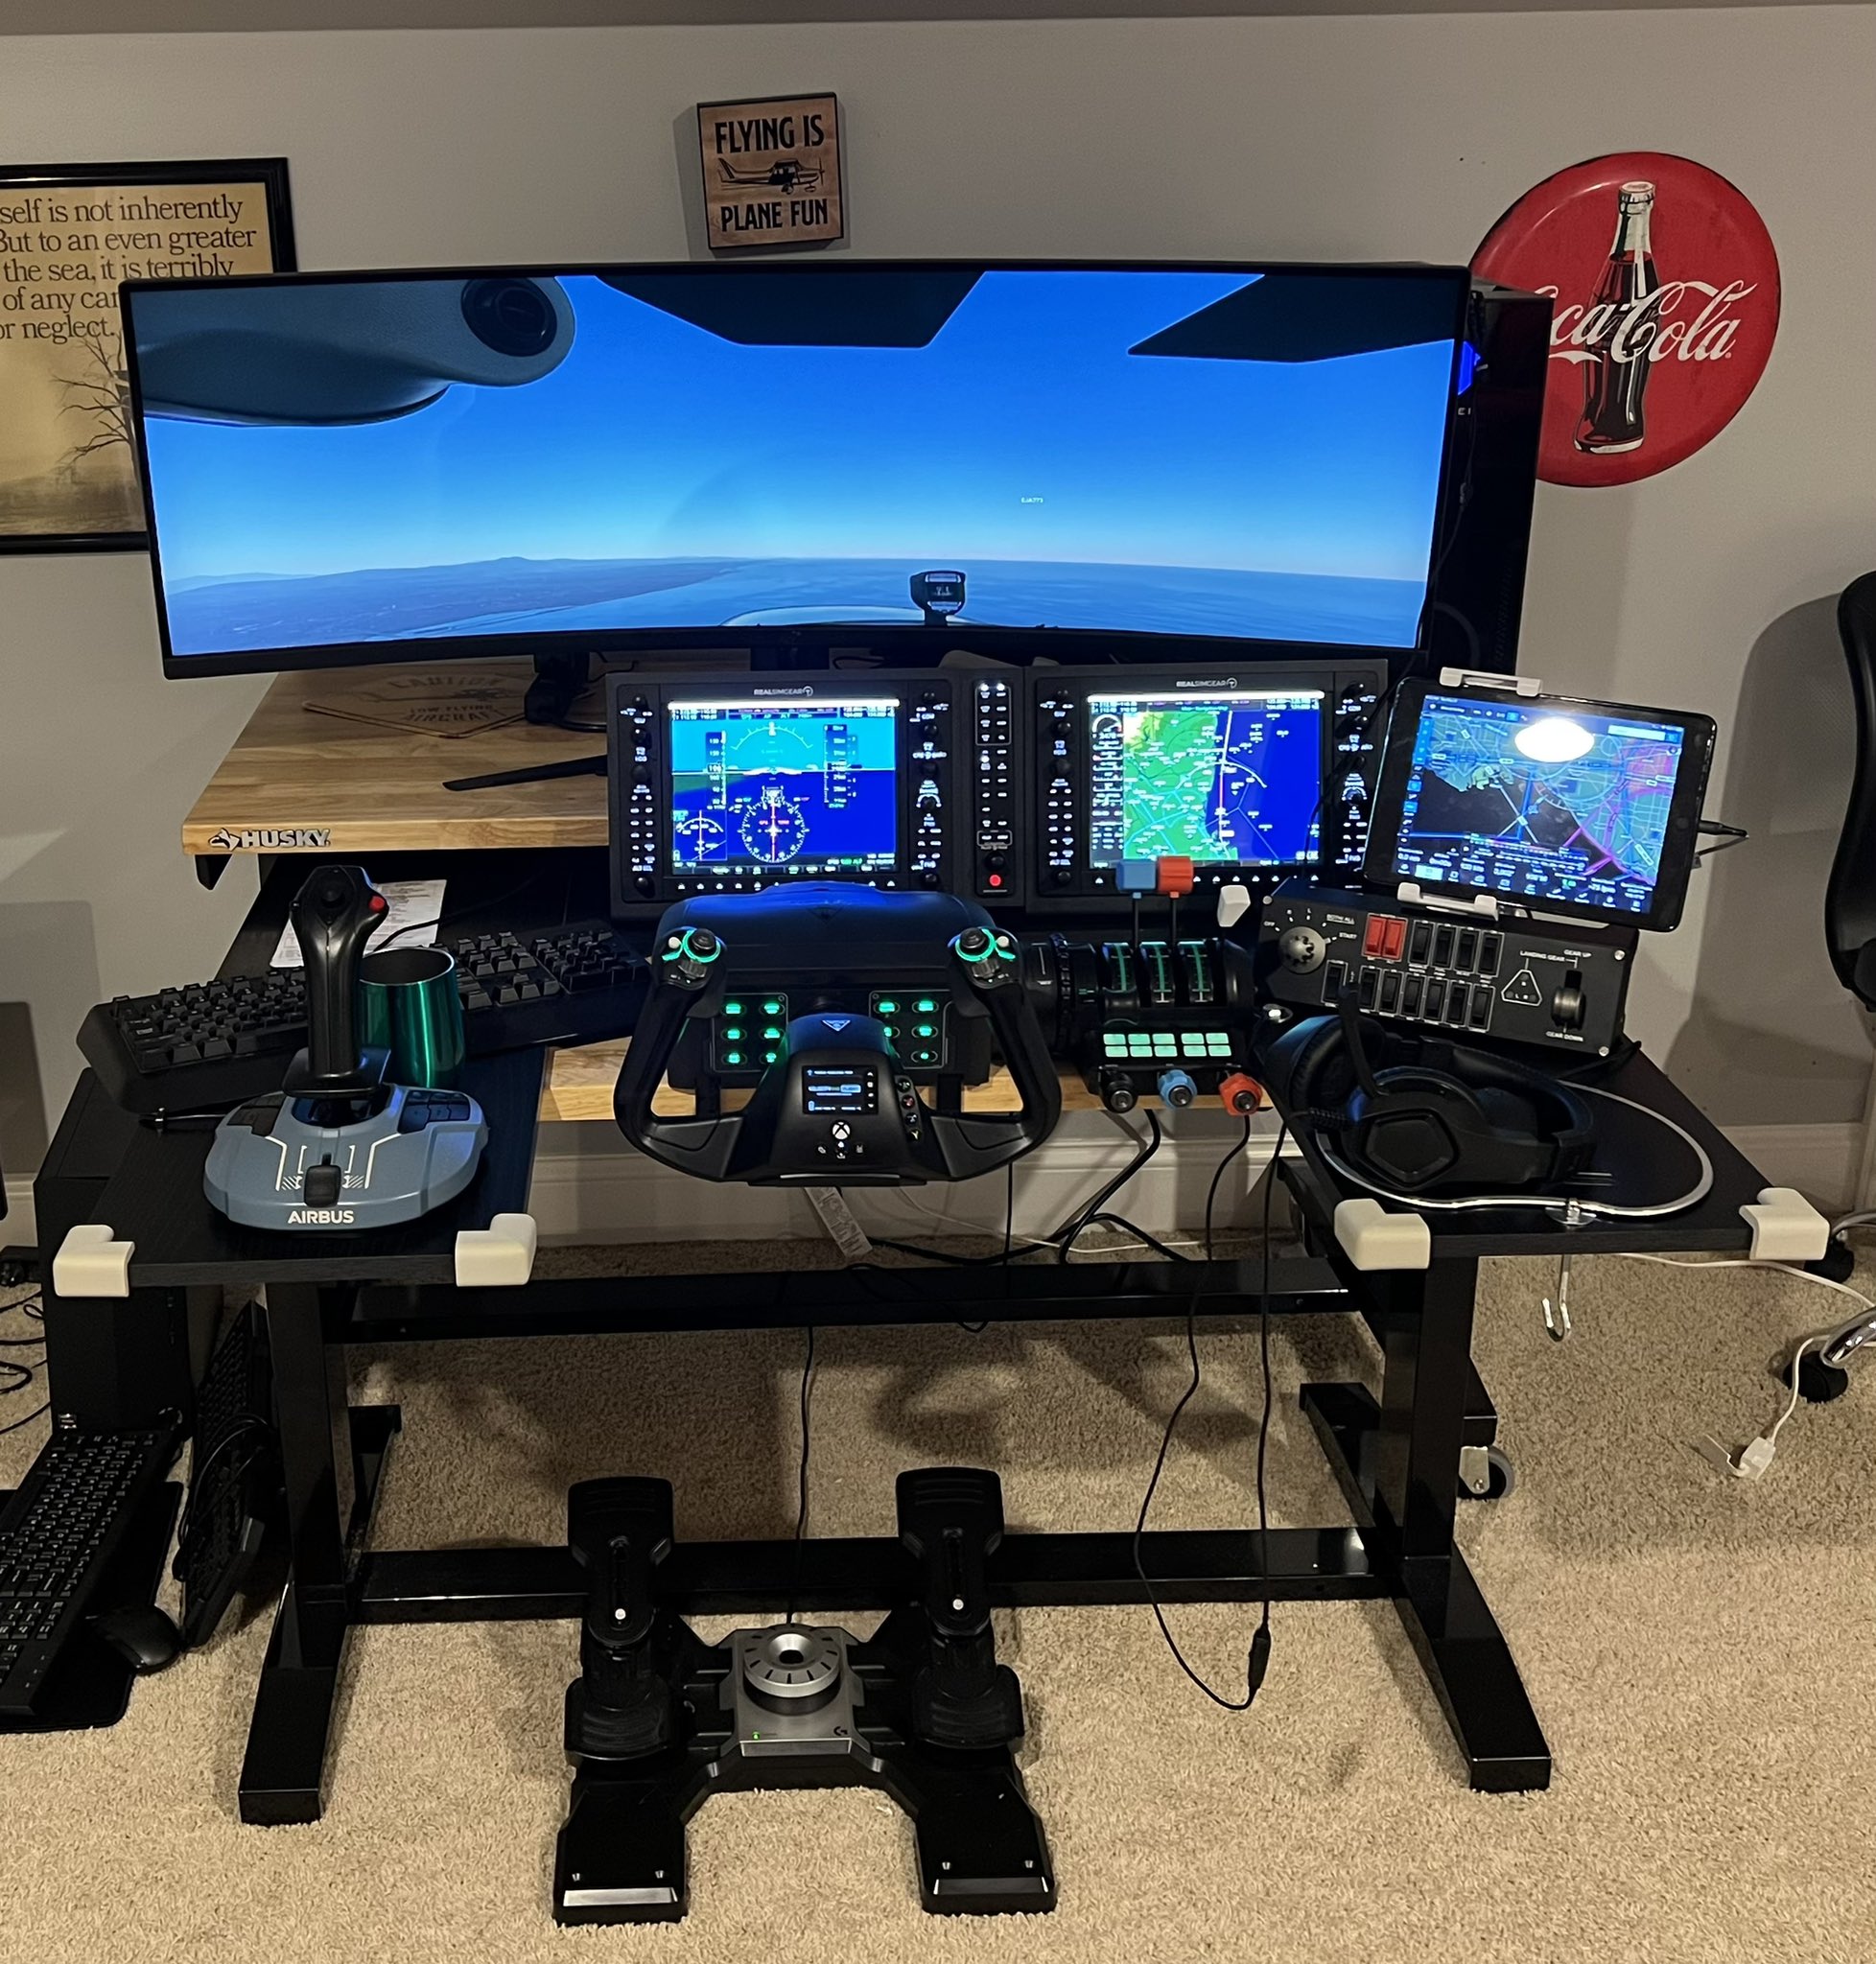 Palads Være blanding Finally “finished” my flight sim build… - Airliners.net